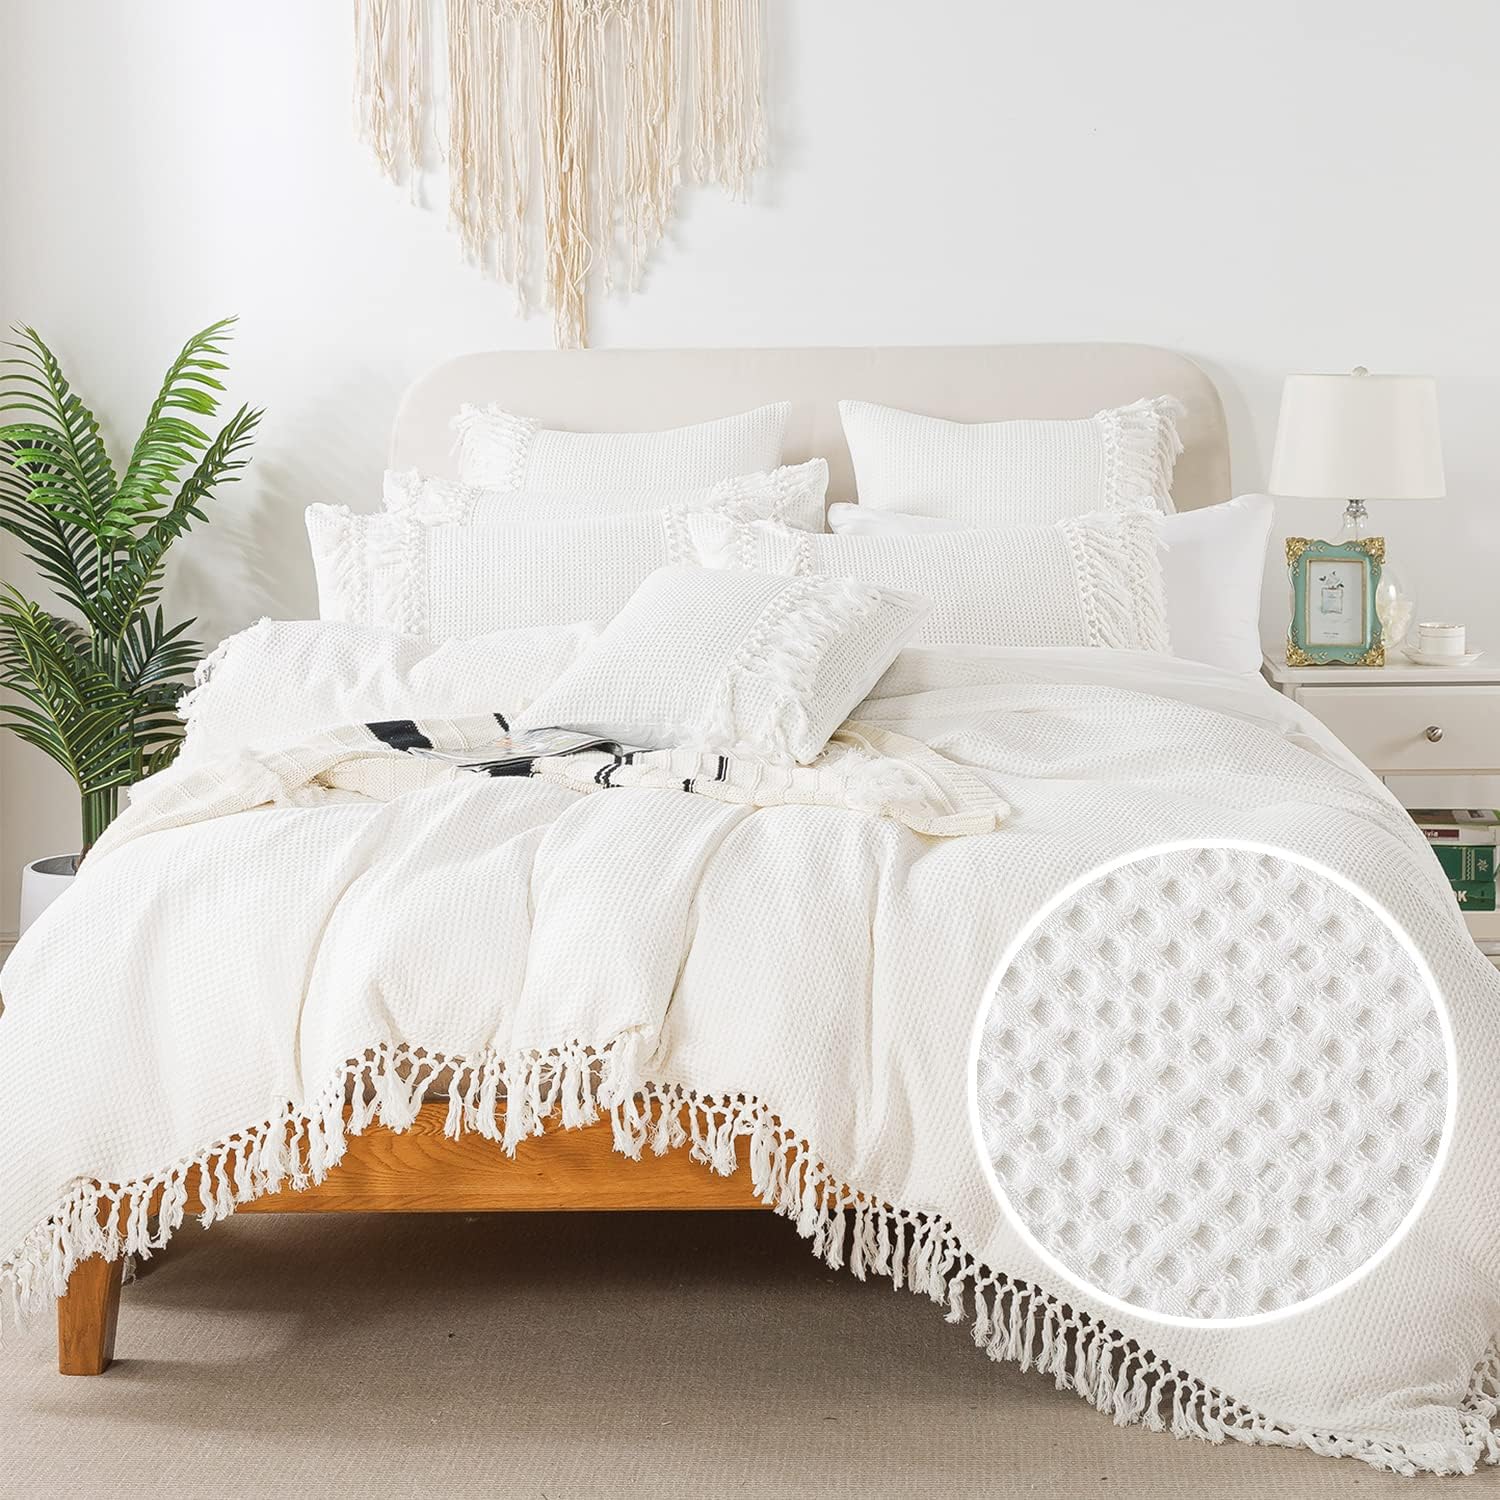 FADFAY Cotton Boho Bedding White Duvet Cover Set King Waffle Weave Coconut White Tassel Comforter Cover Farmhouse Bedding Reversible Washed Cotton Soft Breathable Quilt Covers All Season 3 Pieces